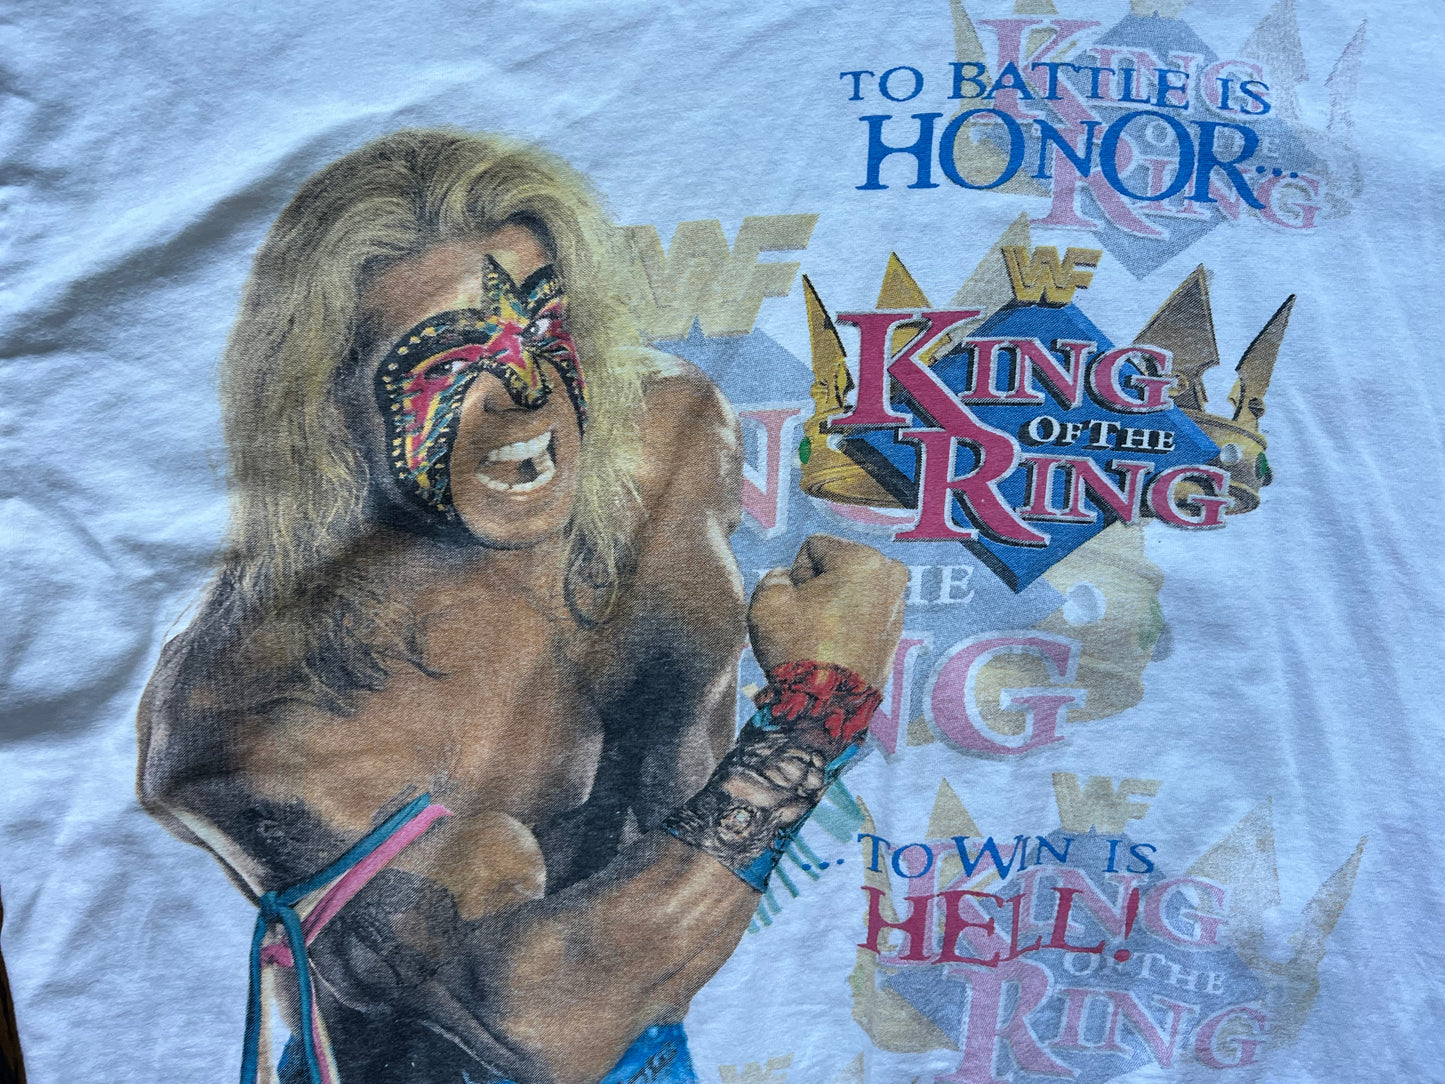 1996 WWF King of the Ring two sided shirt featuring the Ultimate Warrior and the card on the back